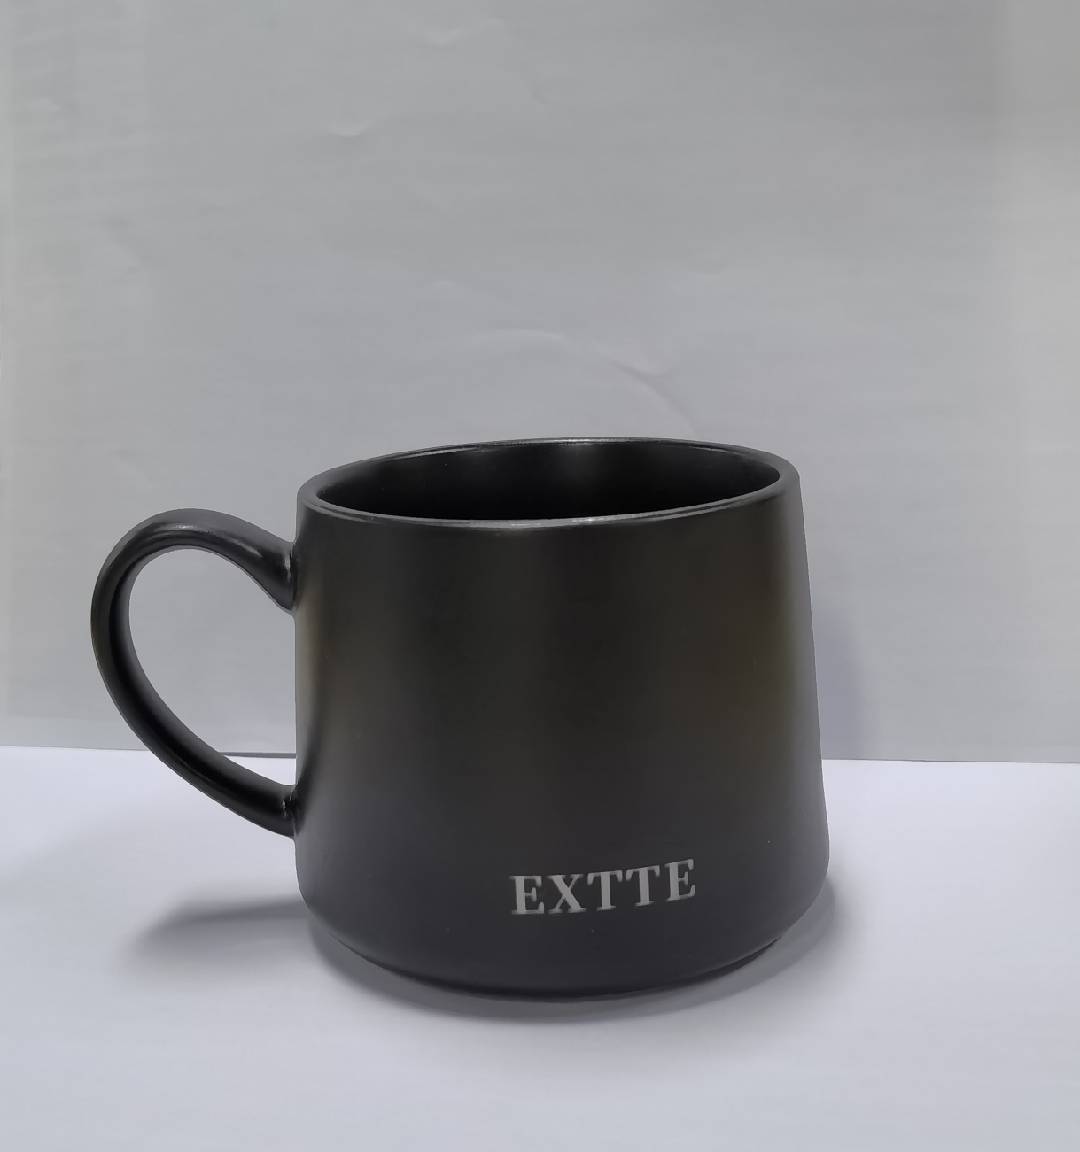 EXTTE Ceramic Cup,Smooth Frosted Porcelain Mug, Coffee Mugs, Tea Cup, for Office and Home, Black